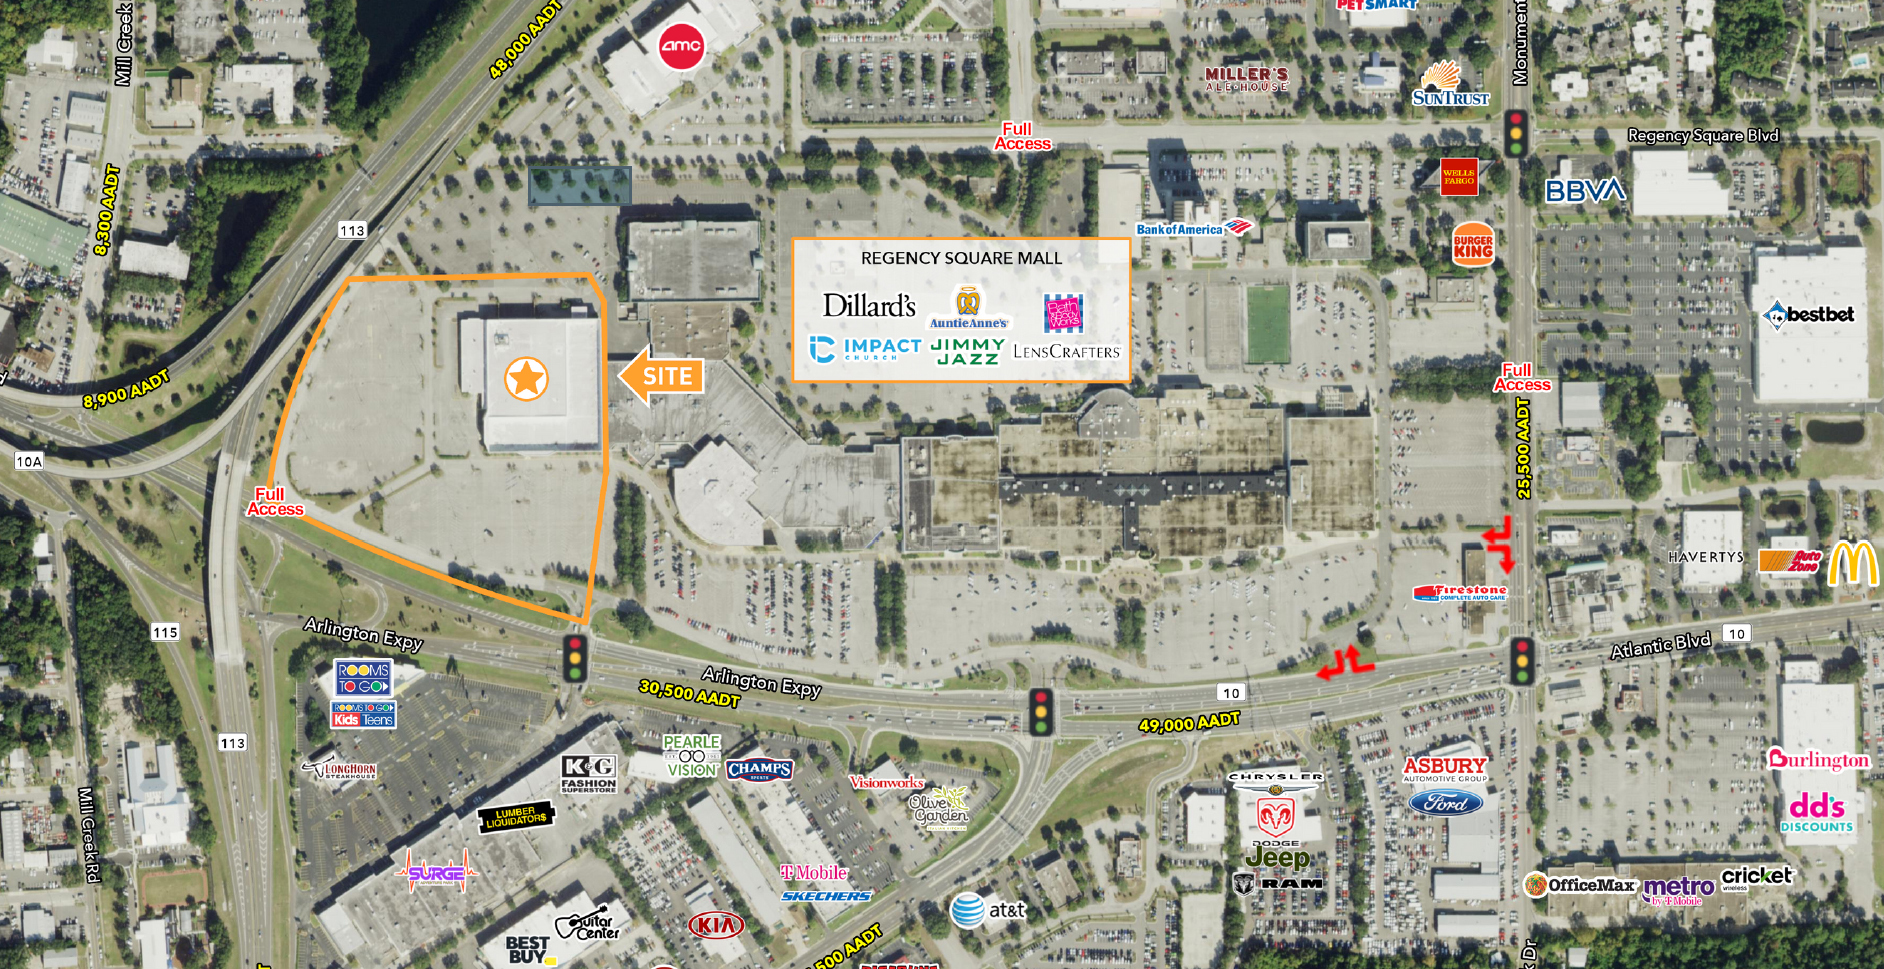 A map marketing the former Sears at Regency Square Mall.